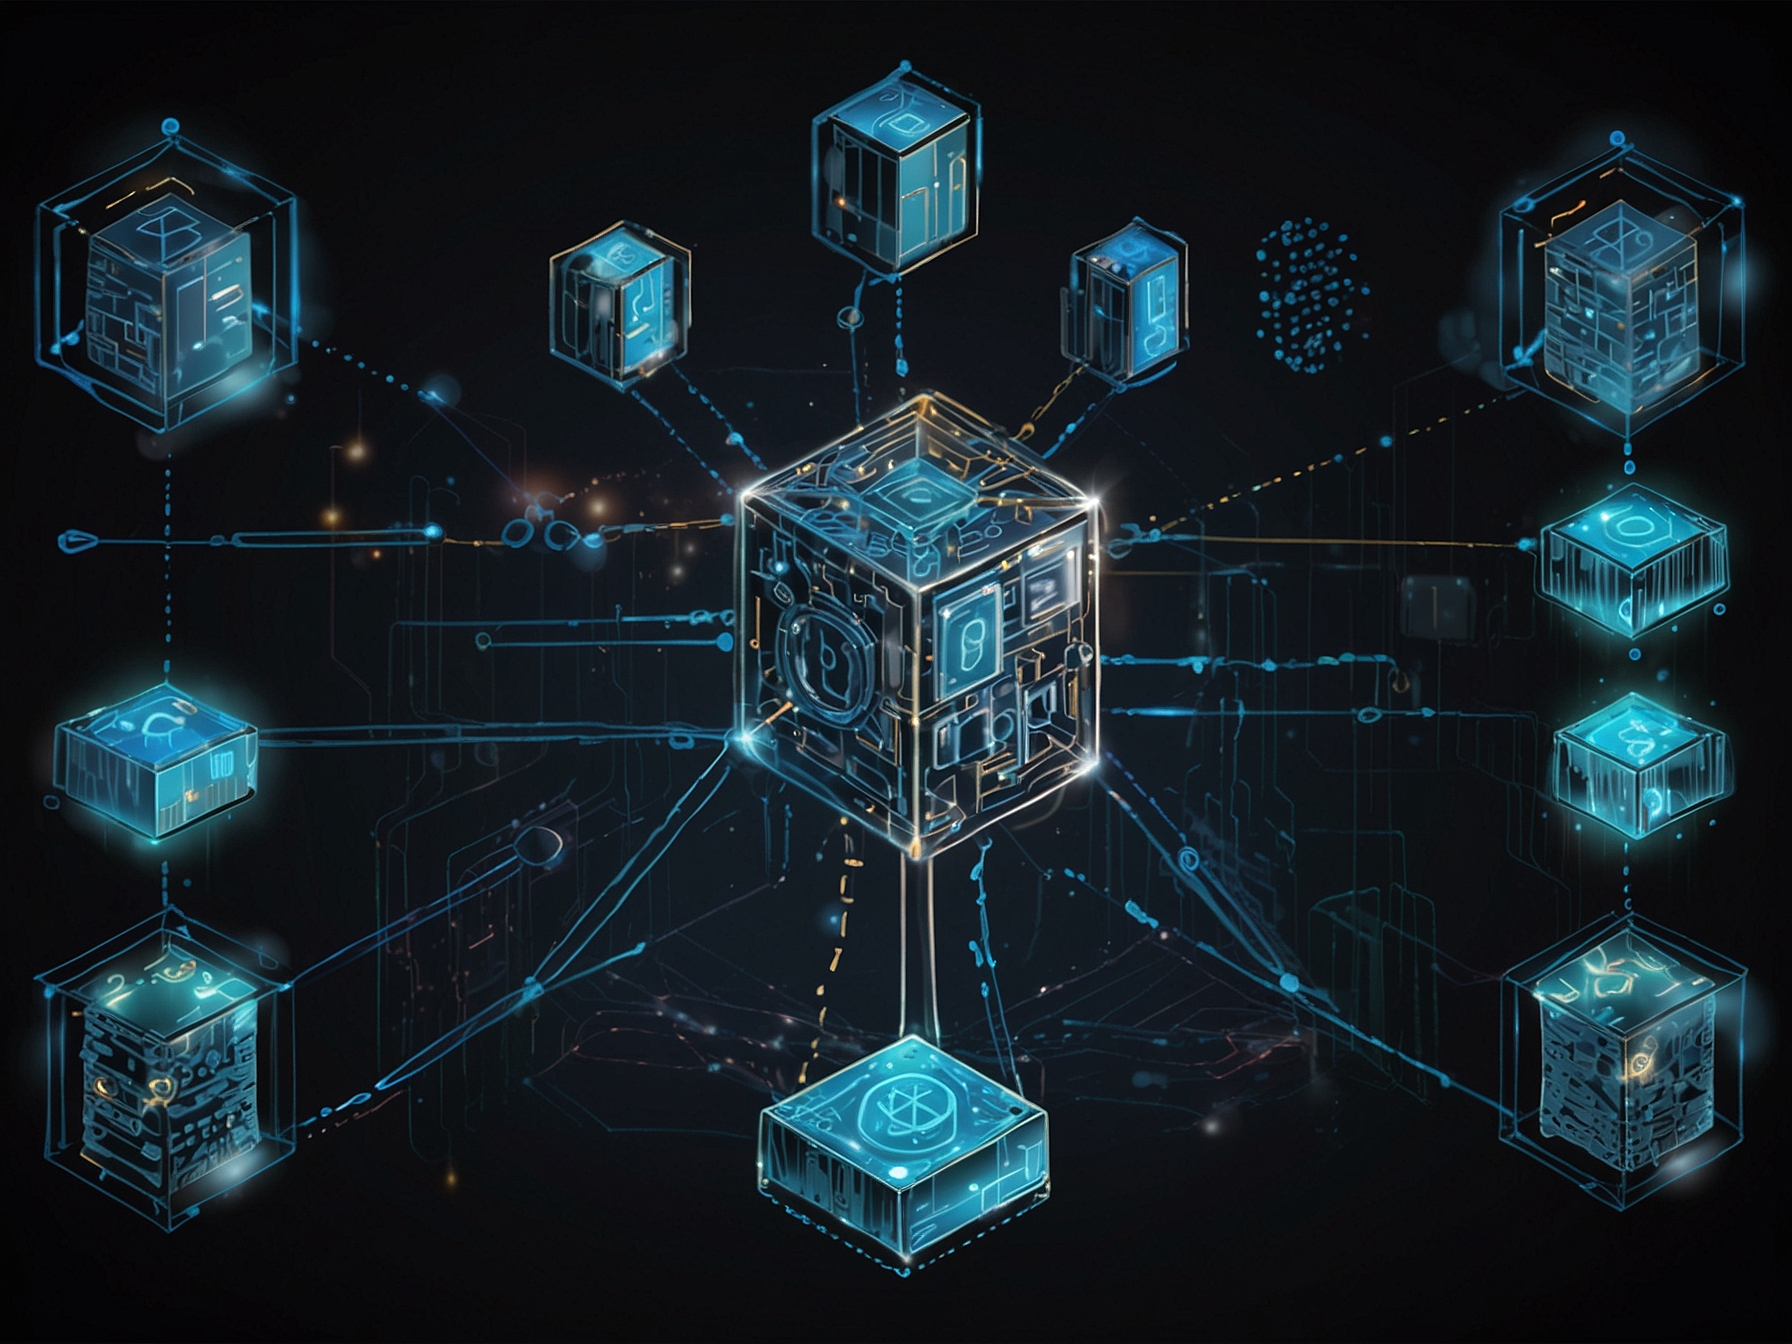 A graphic depicting blockchain technology ensuring transparency and security in a decentralized telecommunications network, emphasizing the distribution of control among various stakeholders.